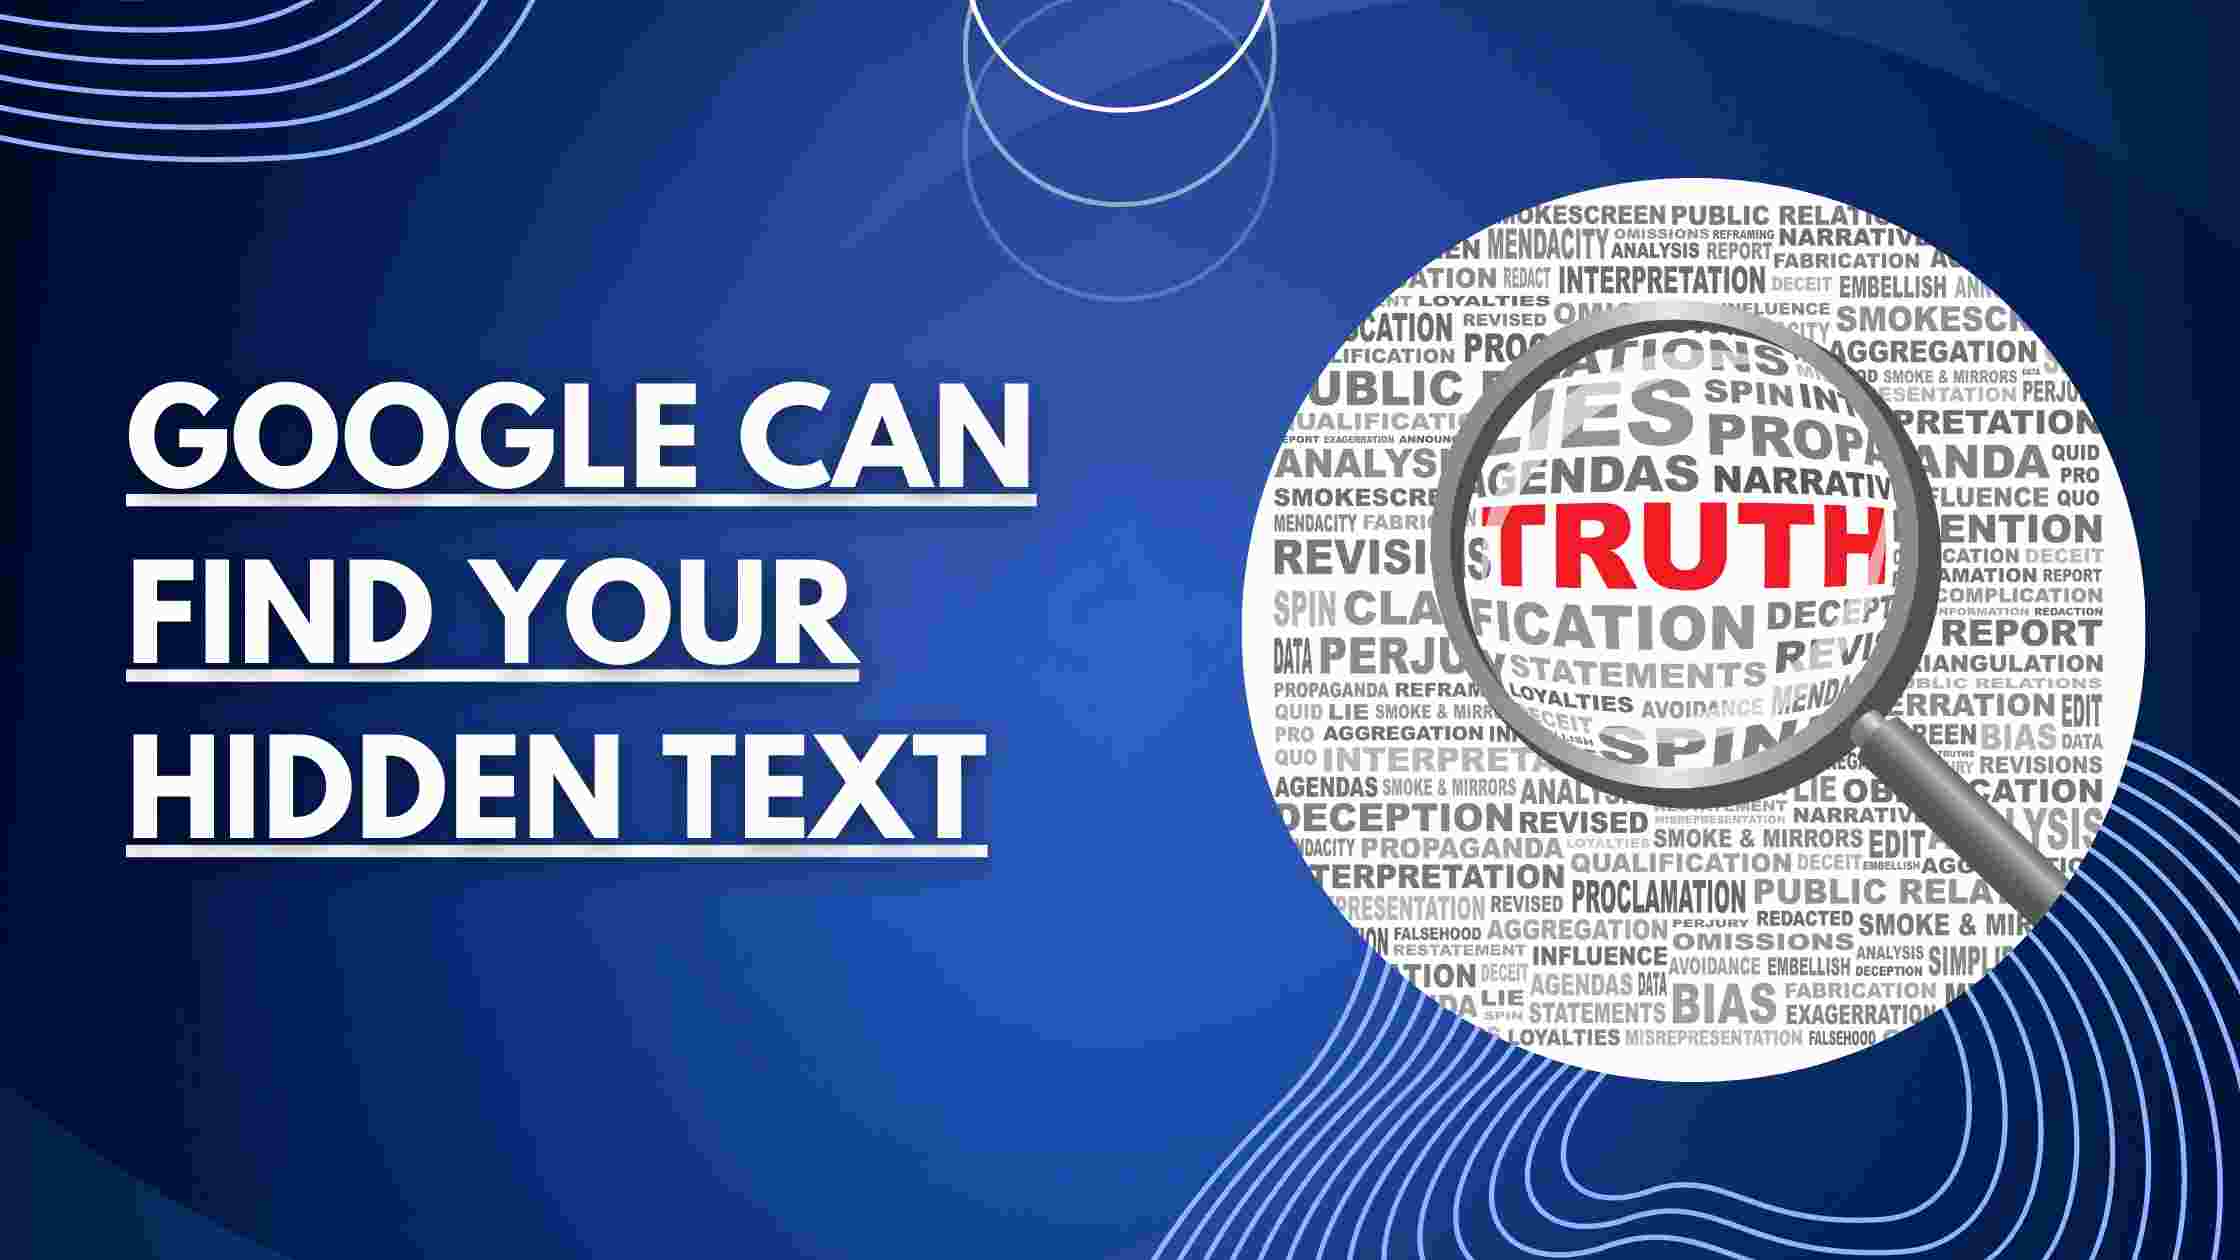 Google Can Find Your Hidden Text